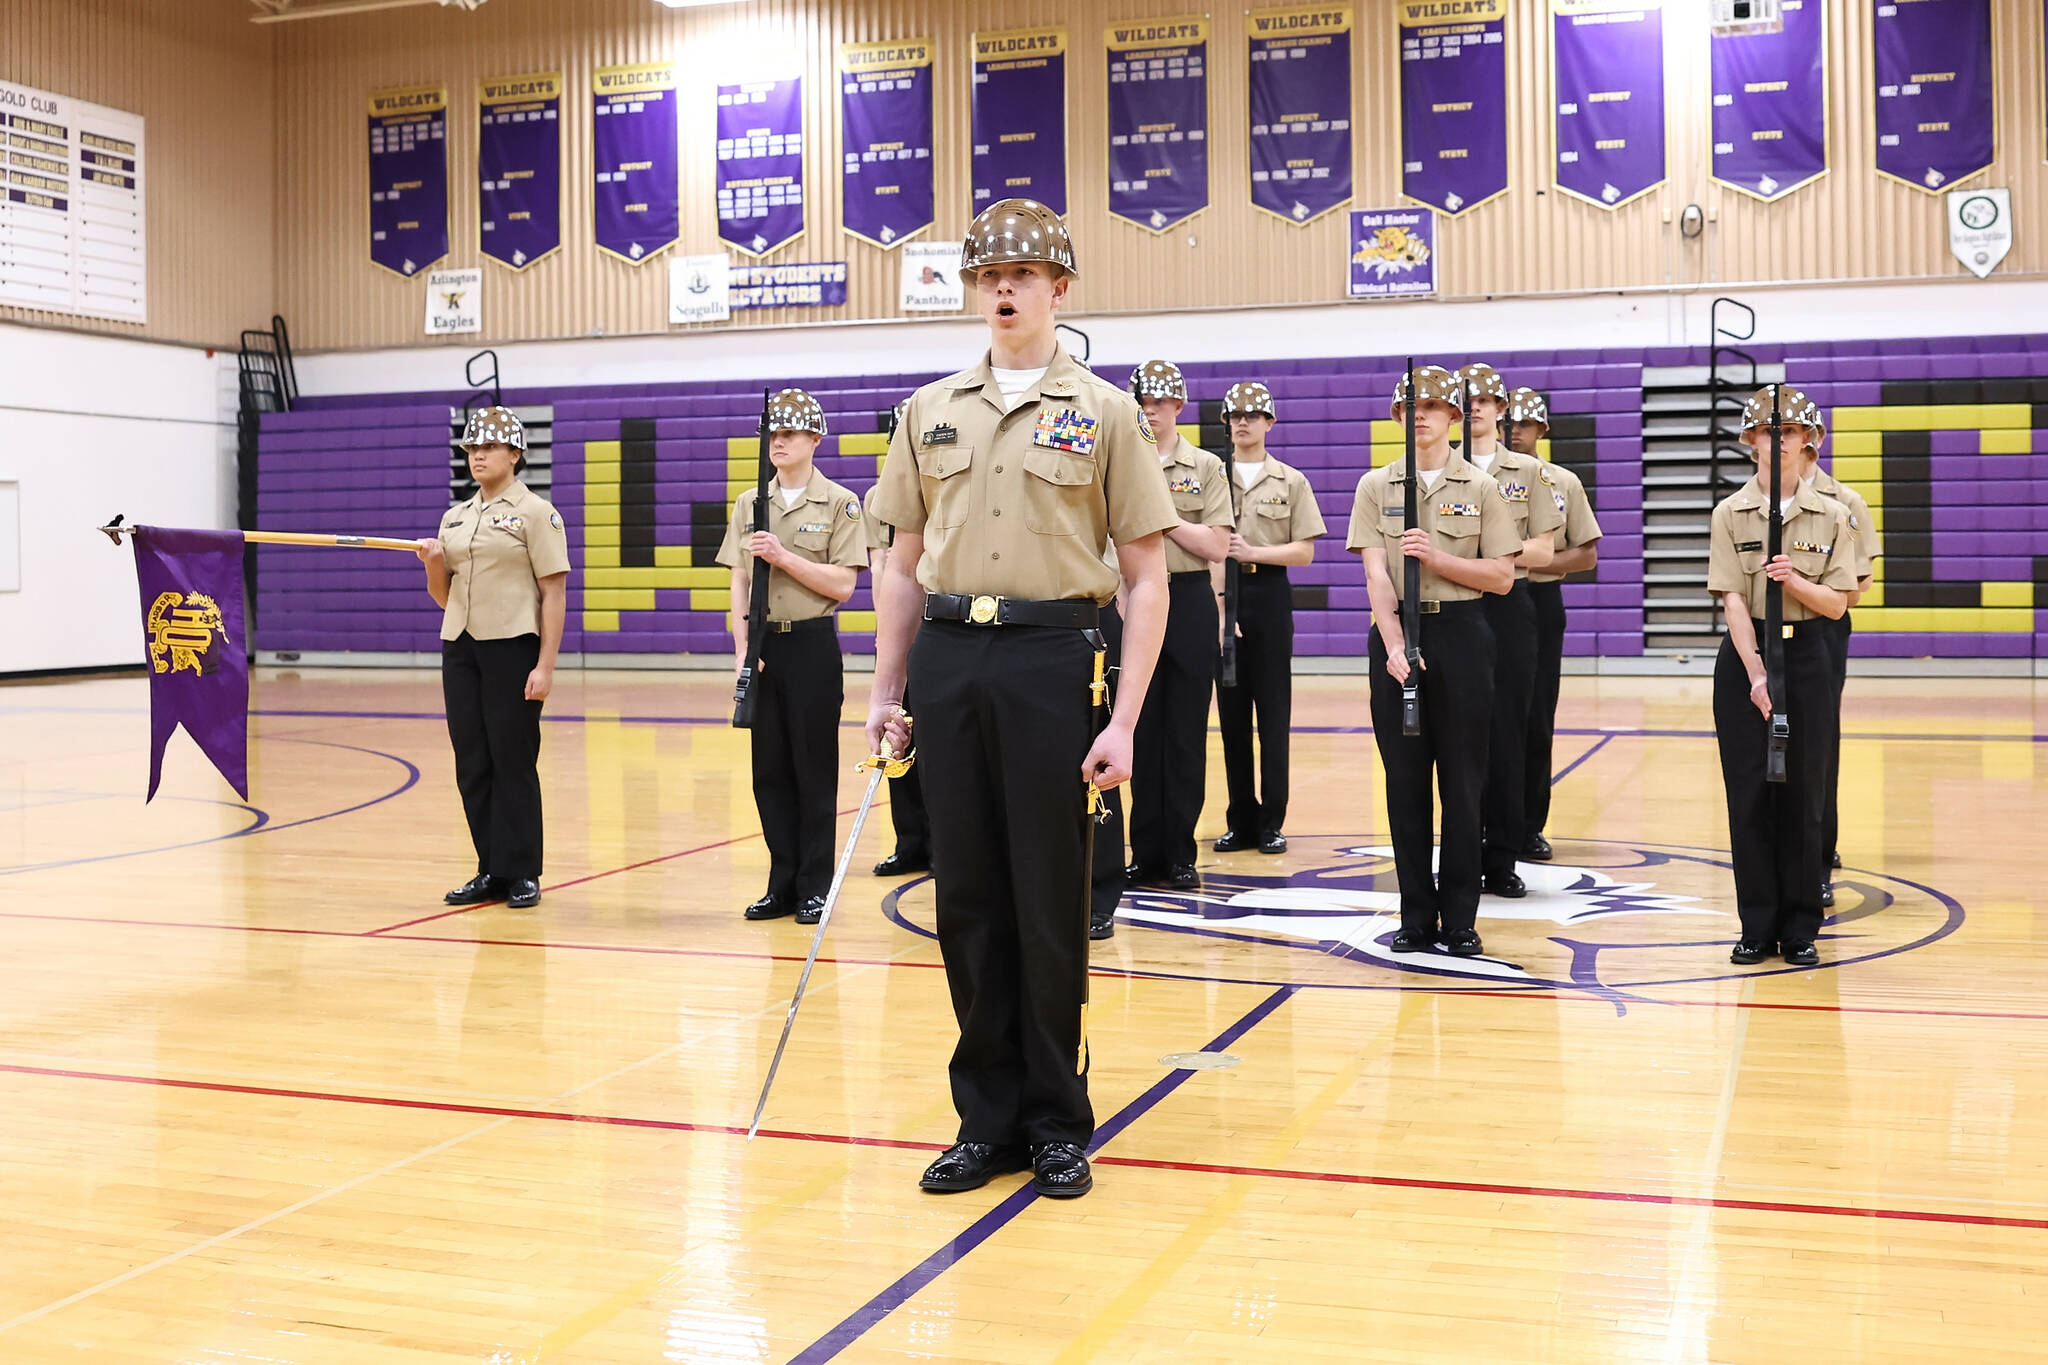 Caden Guy commands the Armed Drill Team. He won first place in the Armed Drill Team Commander.